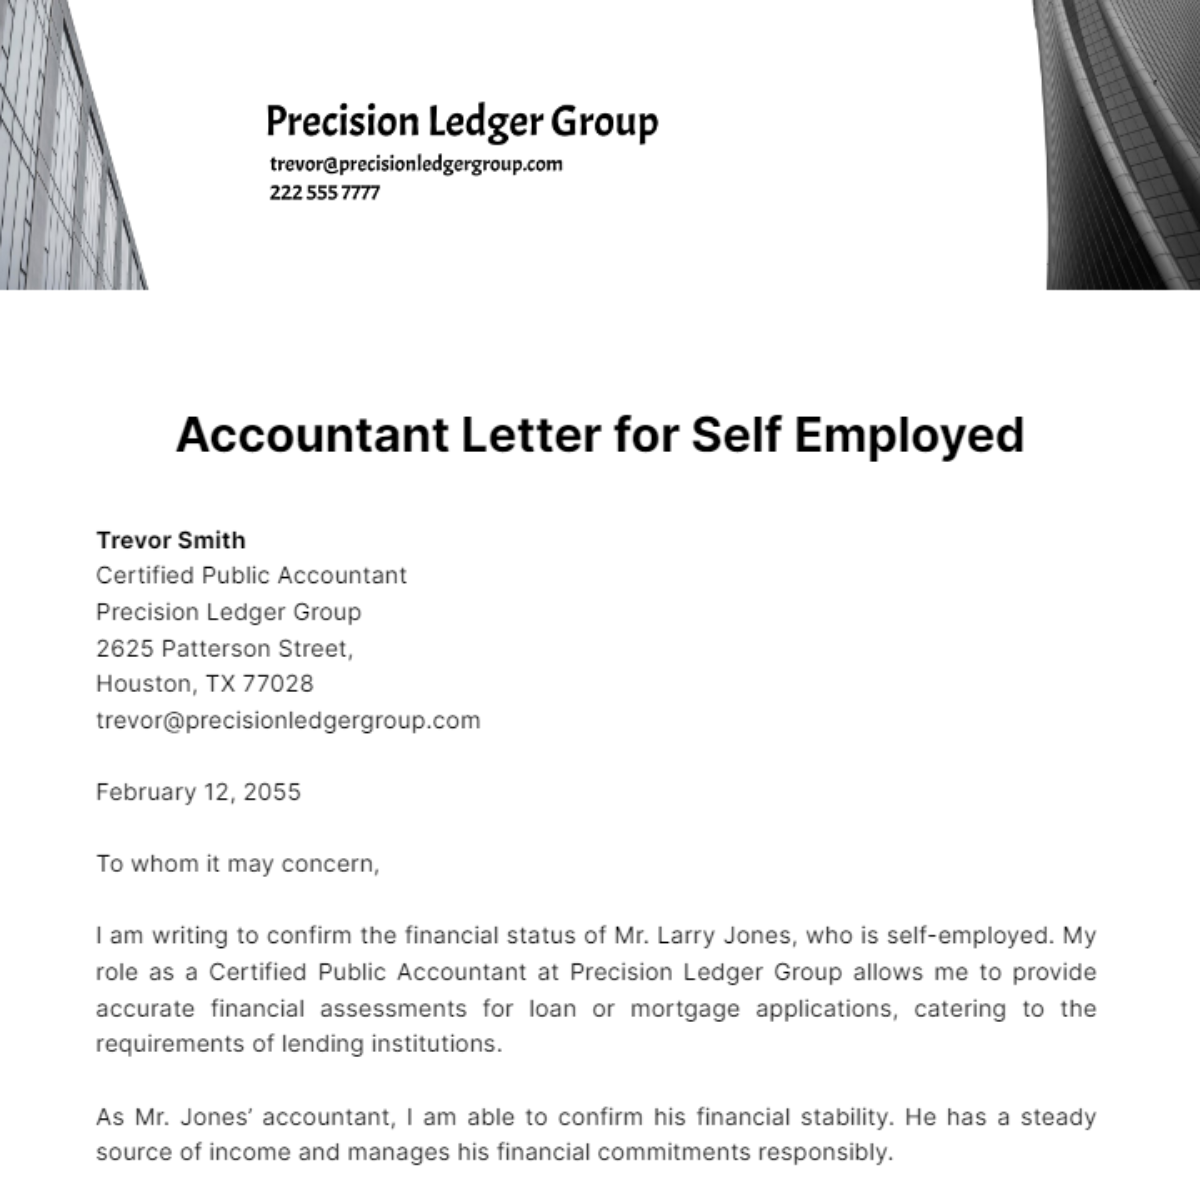 Accountant Letter for Self Employed Template